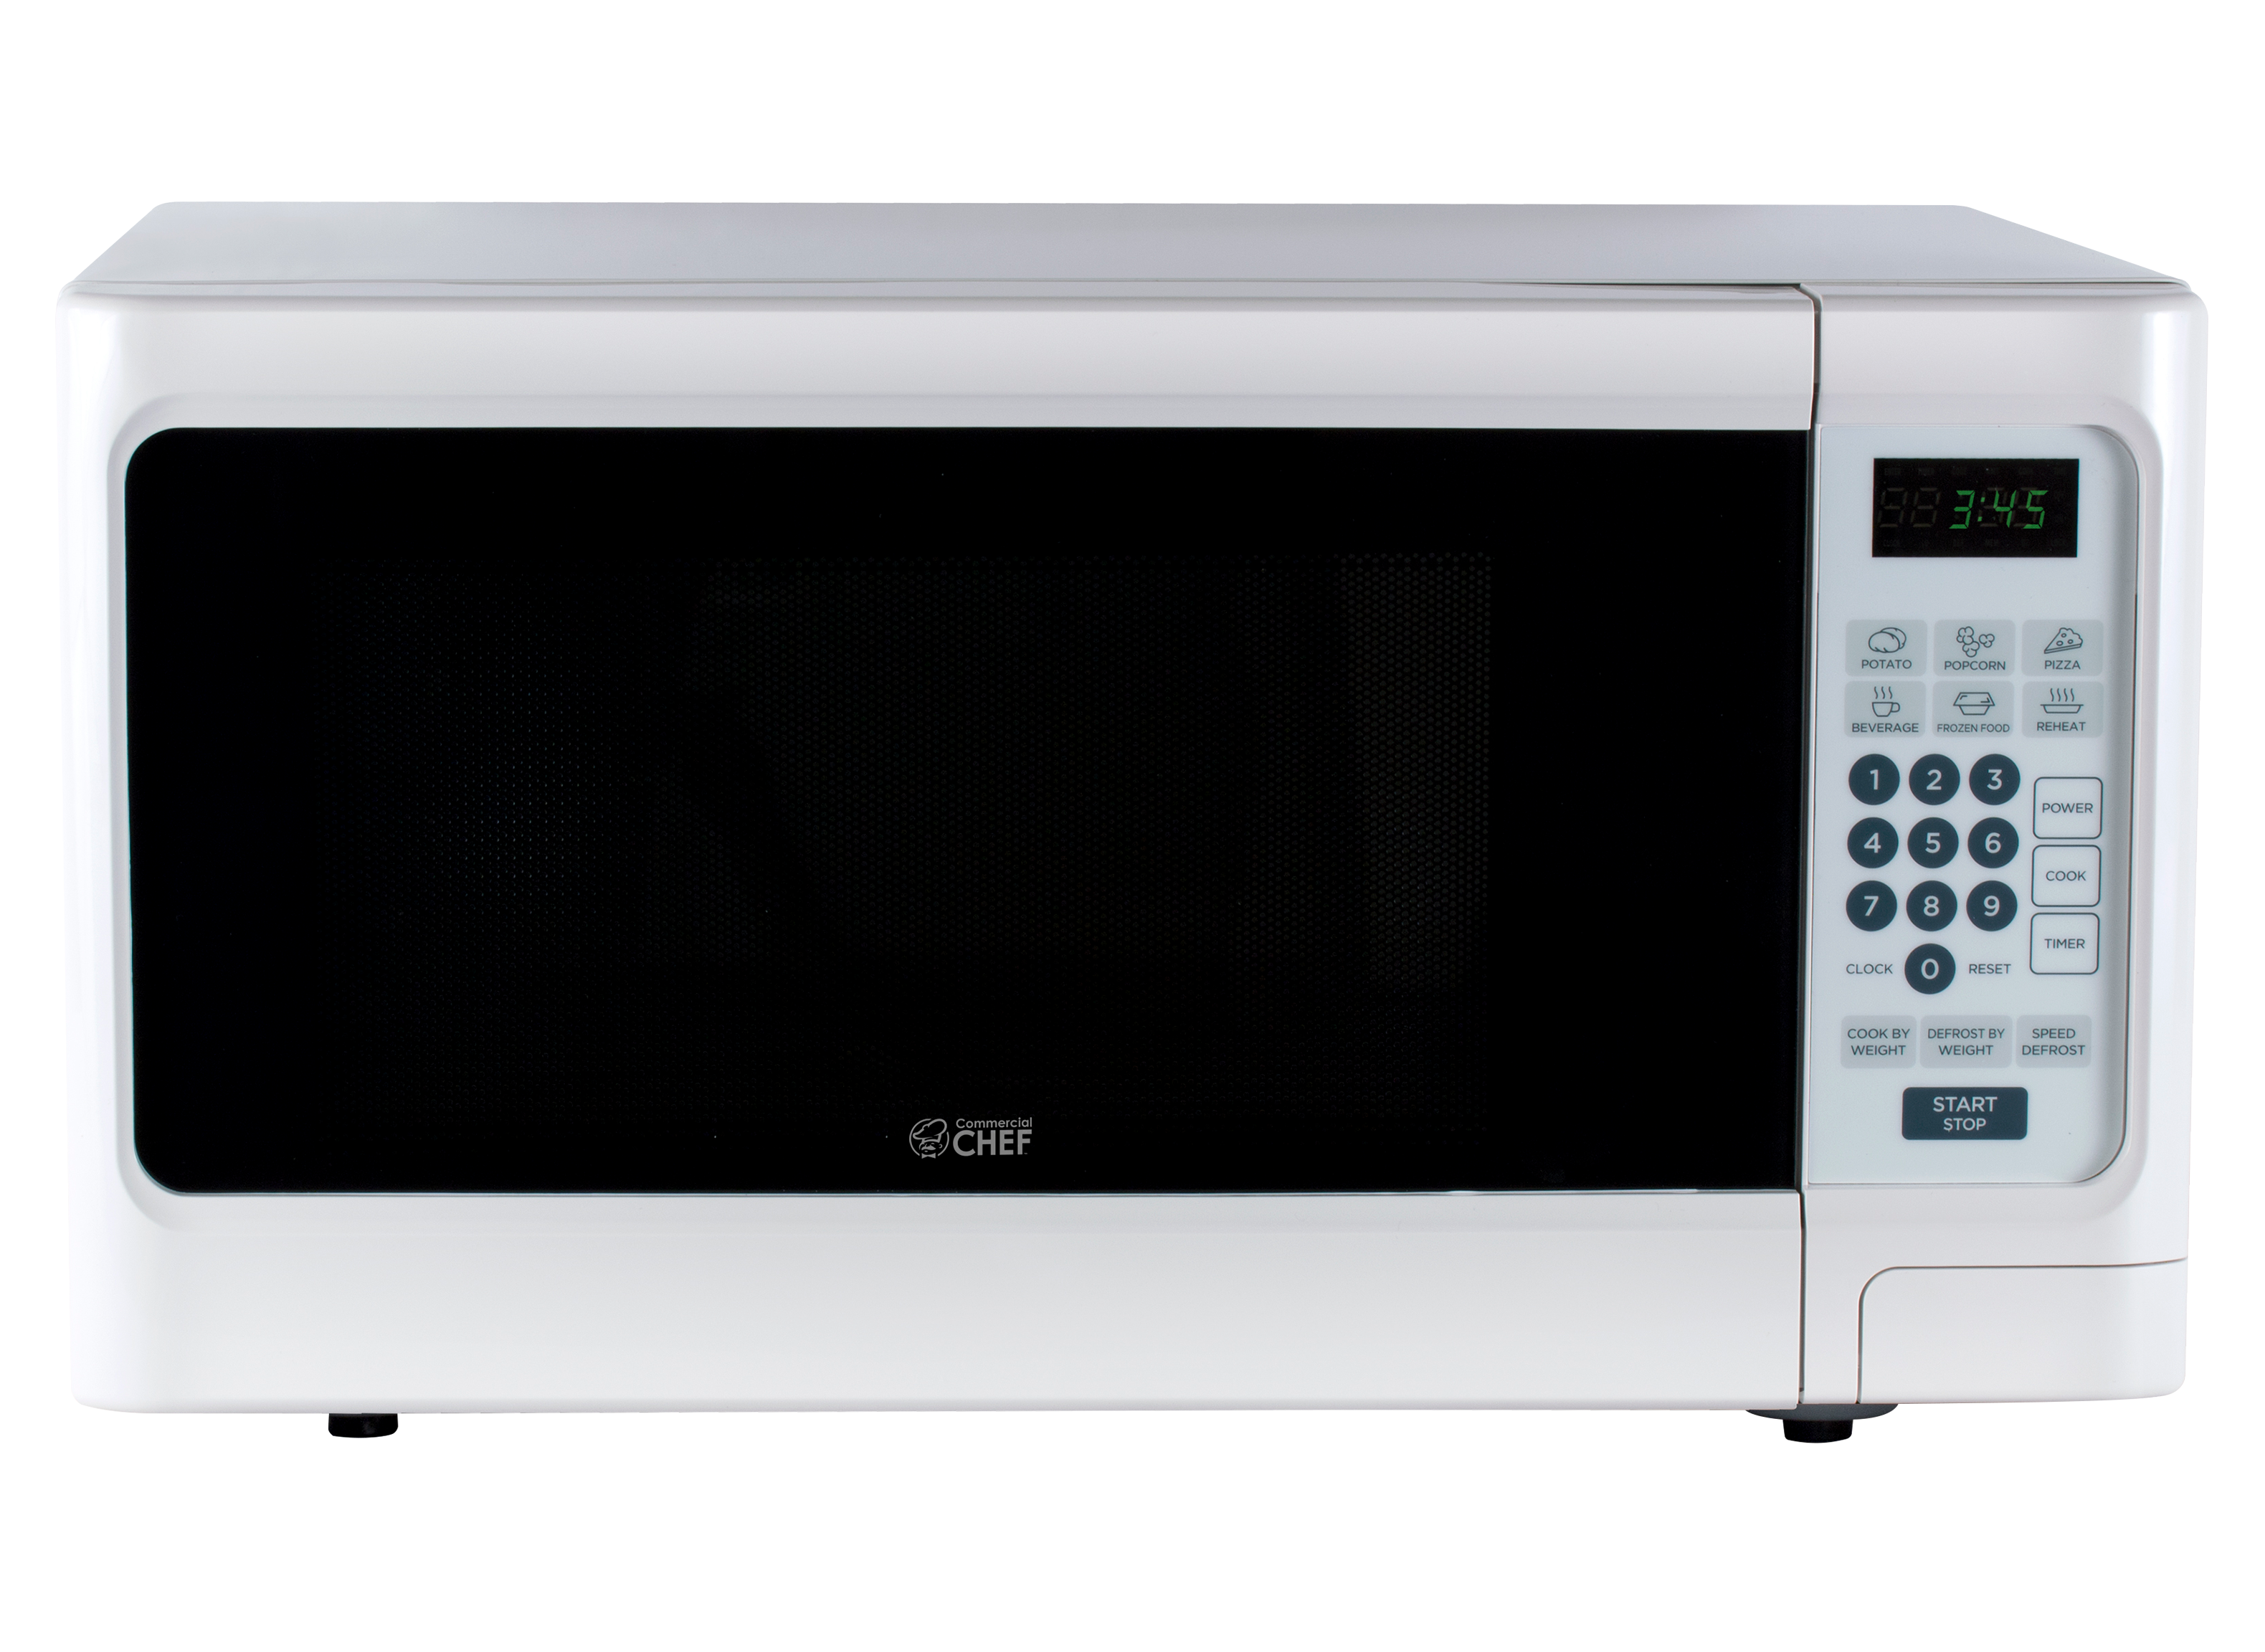 https://crdms.images.consumerreports.org/prod/products/cr/models/406733-midsized-countertop-microwaves-commercial-chef-chcm11100w-10029852.png